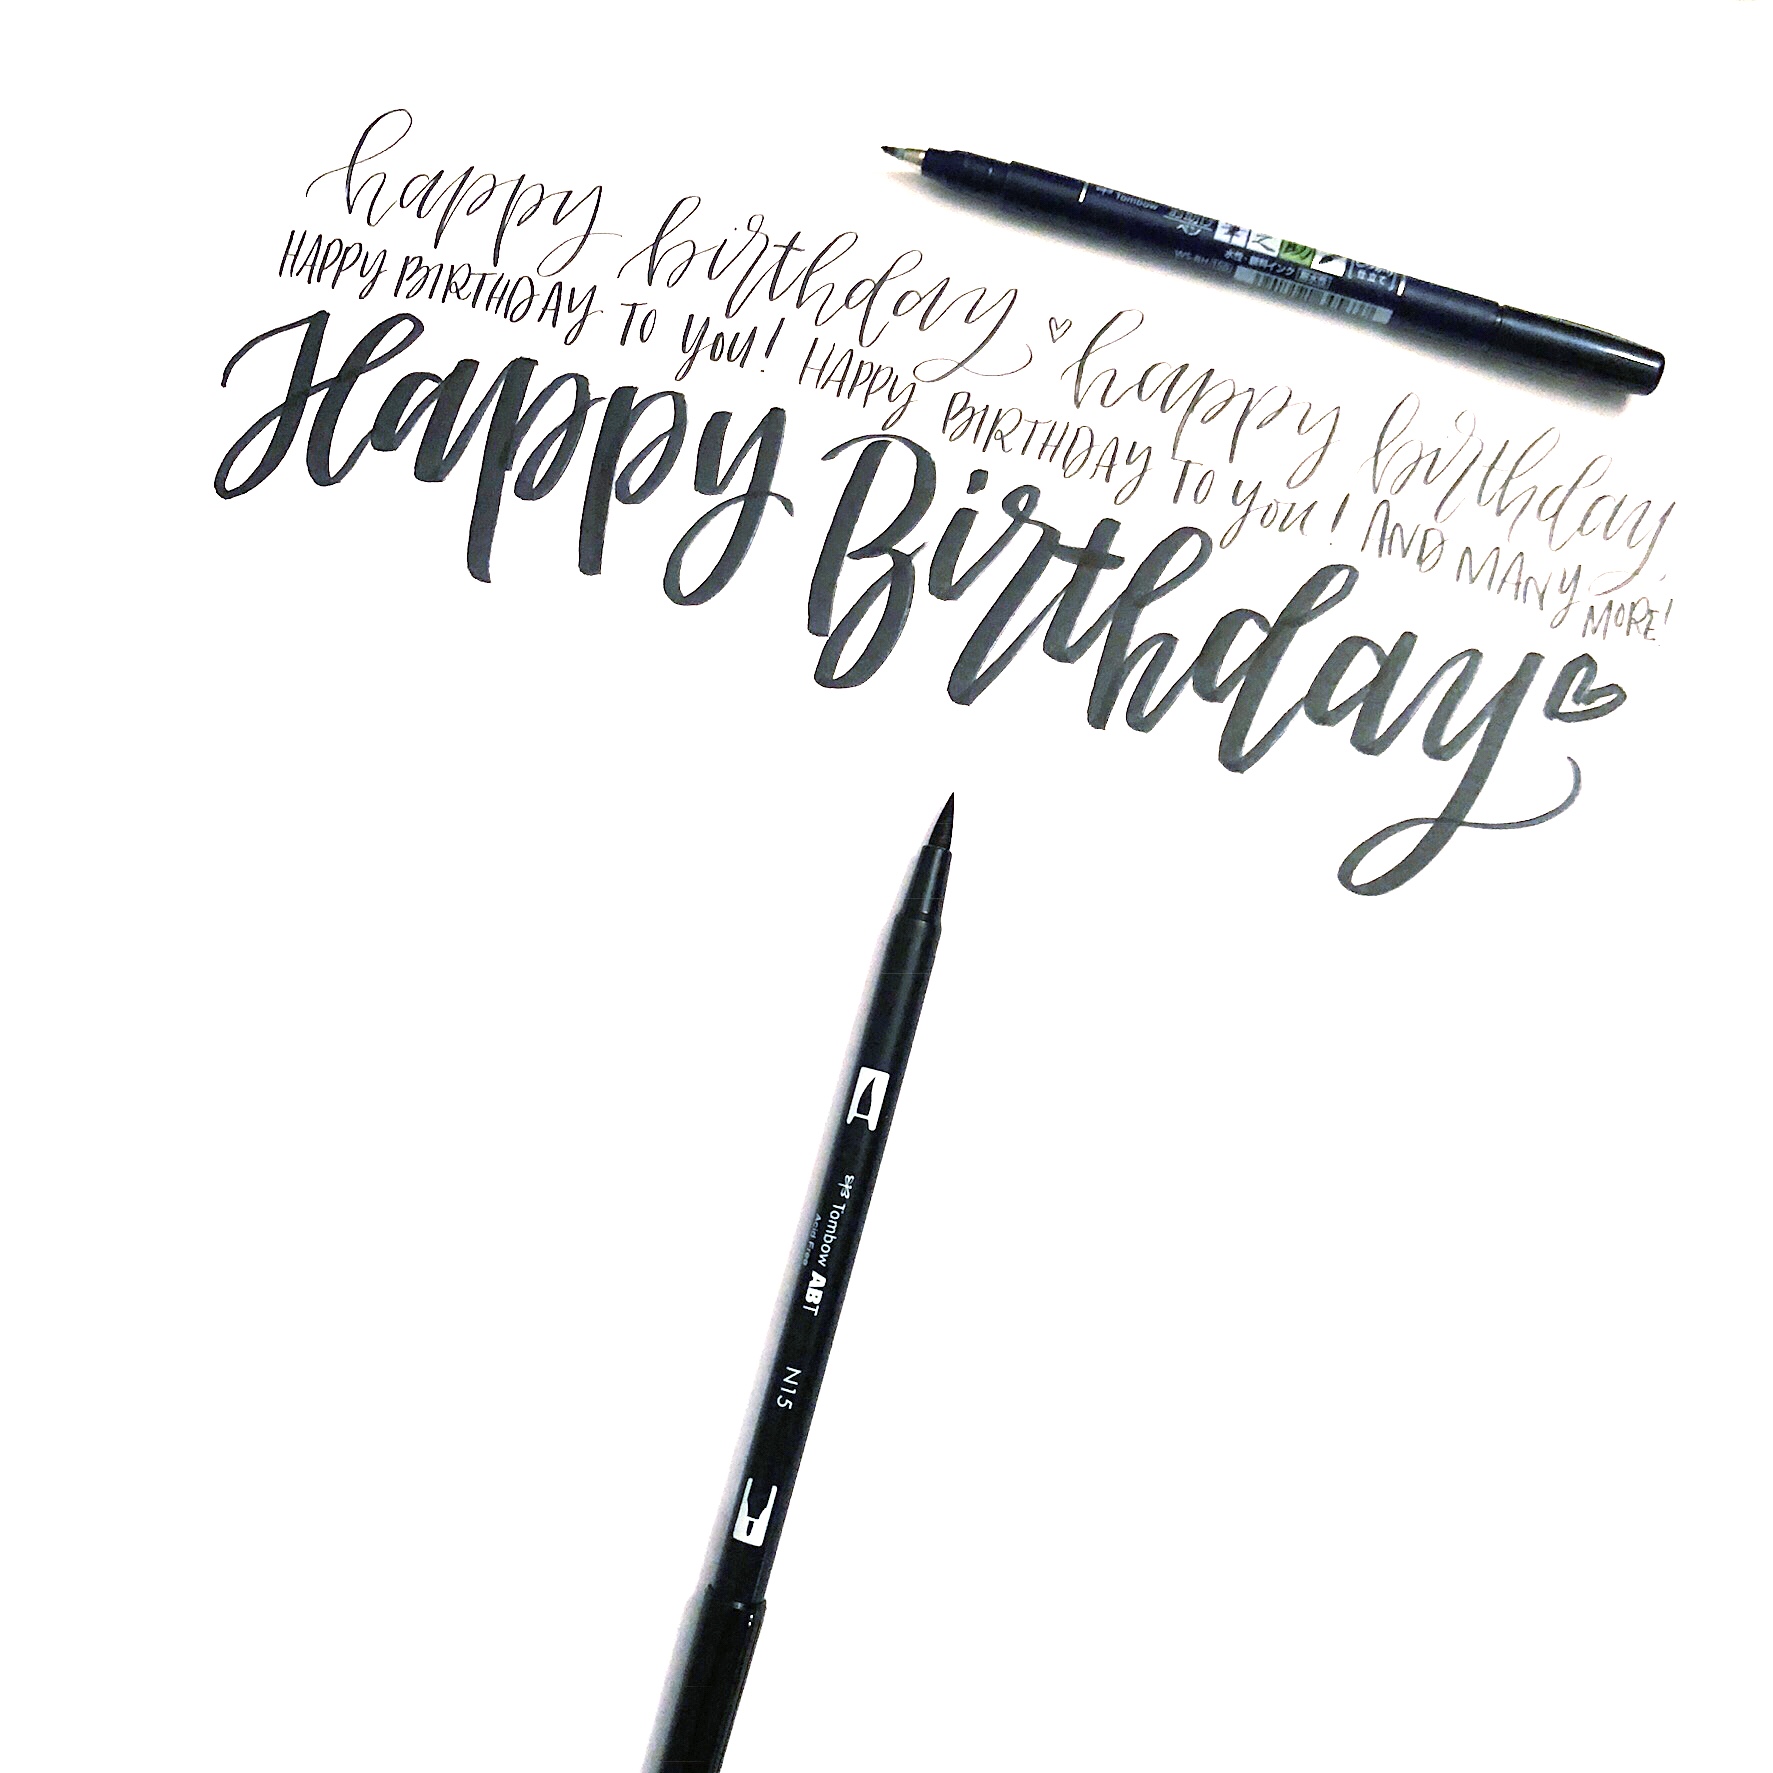 Lauren Fitzmaurice of @renmadecalligraphy and renmadecalligraphy.com shows you 3 simple birthday crafts that can be made with amazing products from TombowUSA.com.